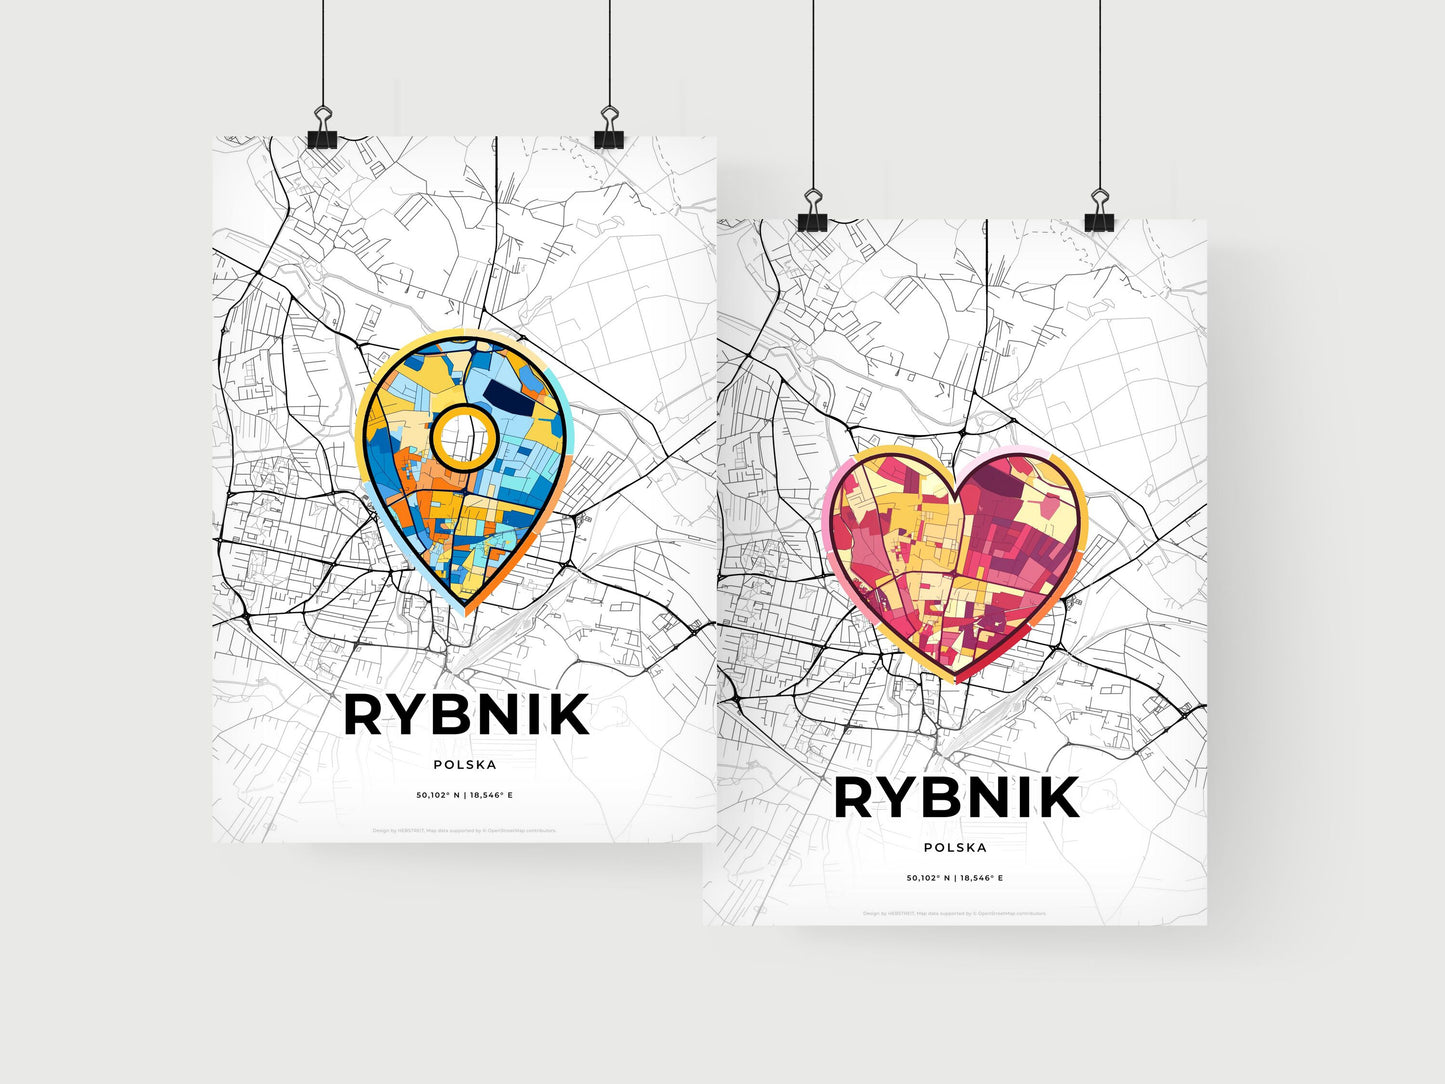 RYBNIK POLAND minimal art map with a colorful icon. Where it all began, Couple map gift.